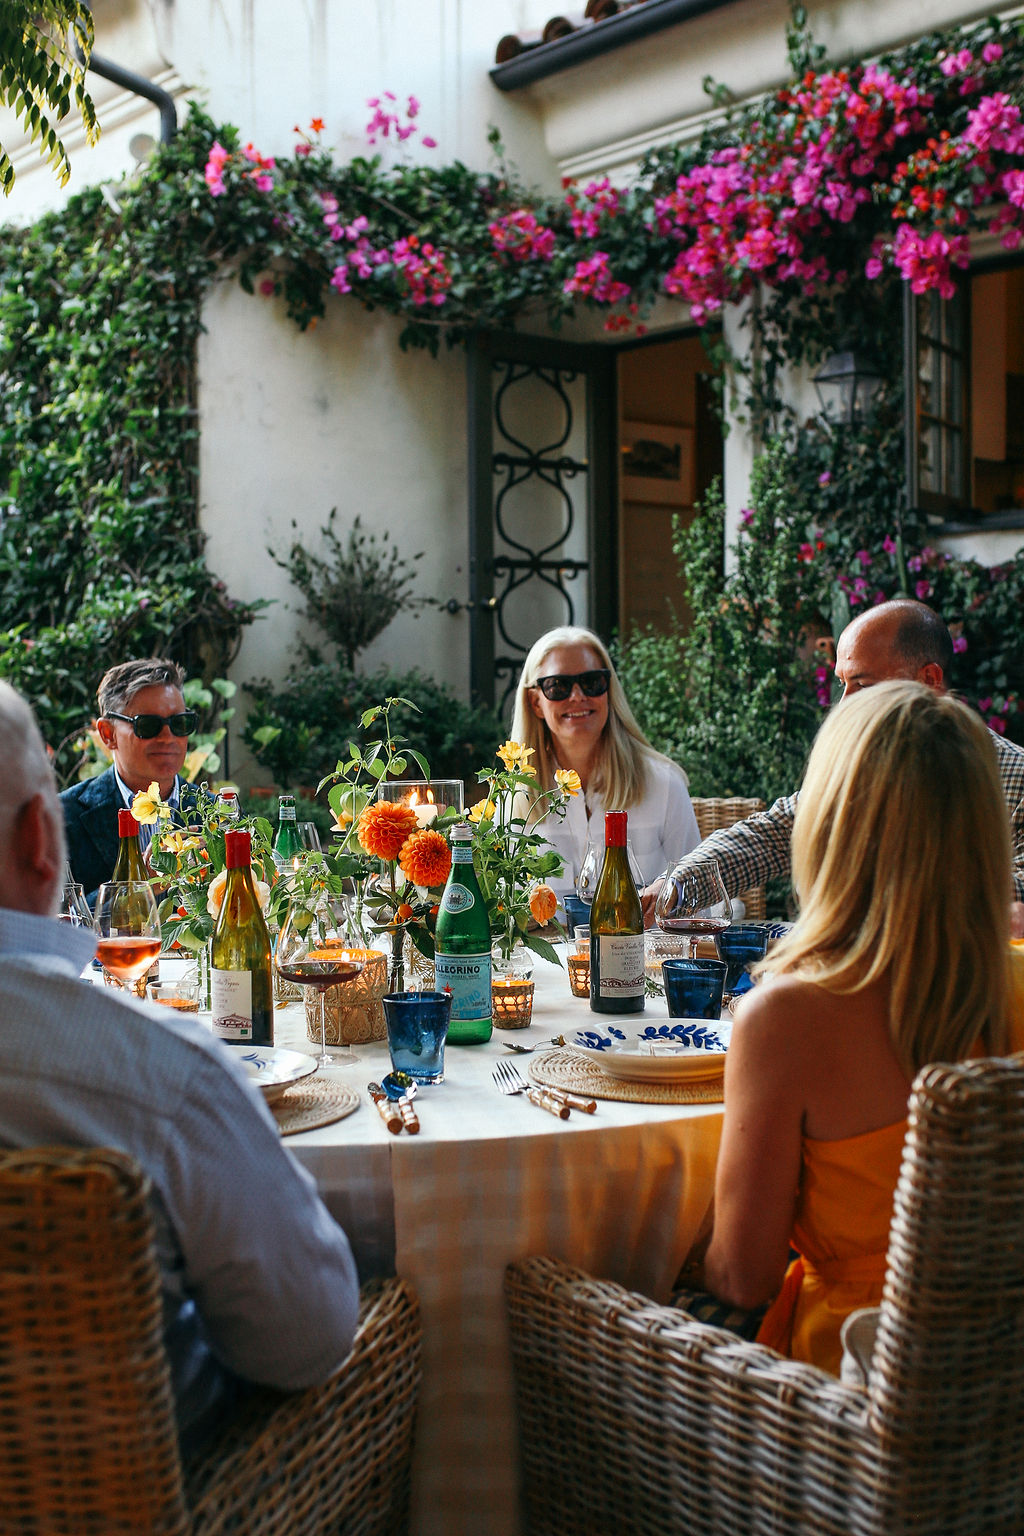 Valerie Rice dinner party in Santa Barbara, table with guests